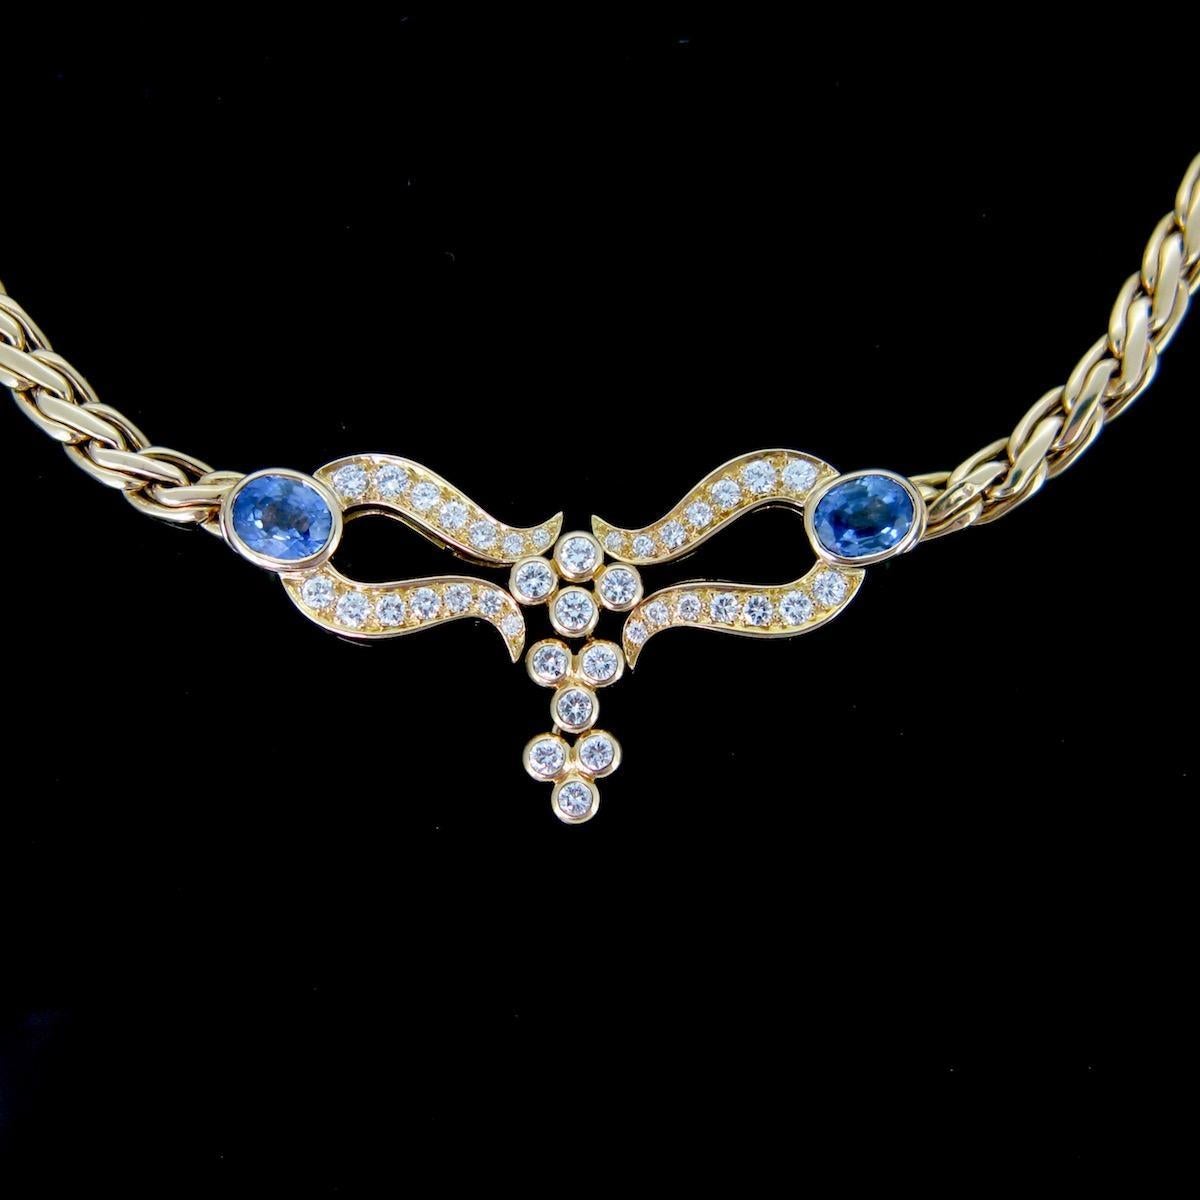 Brilliant Cut Ceylon Sapphires and Diamonds Necklace, 18kt Yellow Gold, France